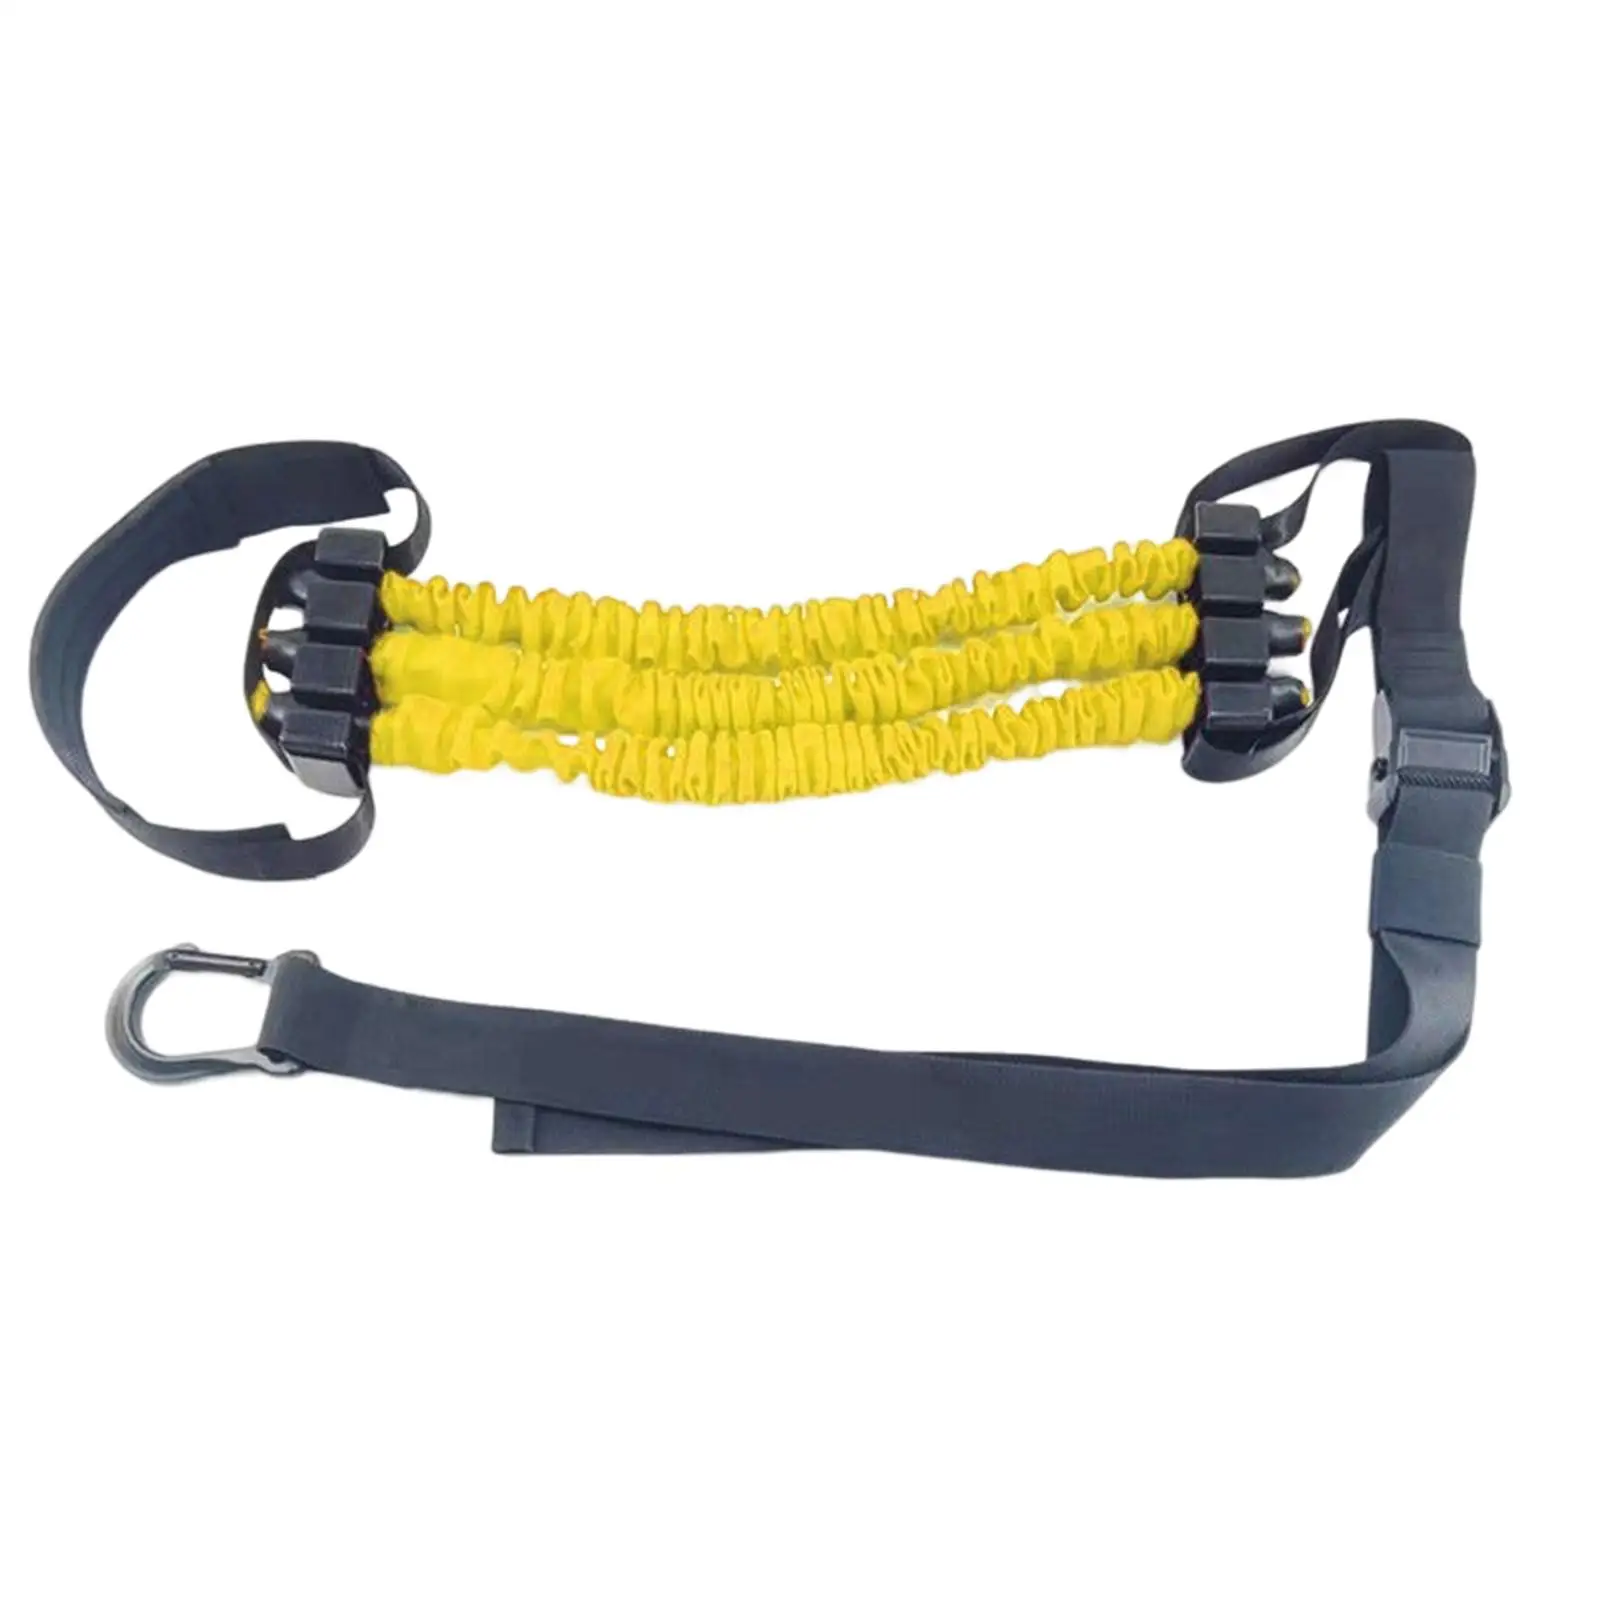 Chin up Assistance Band Improve Chest Strength Heavy Duty for Powerlifting Body Stretching